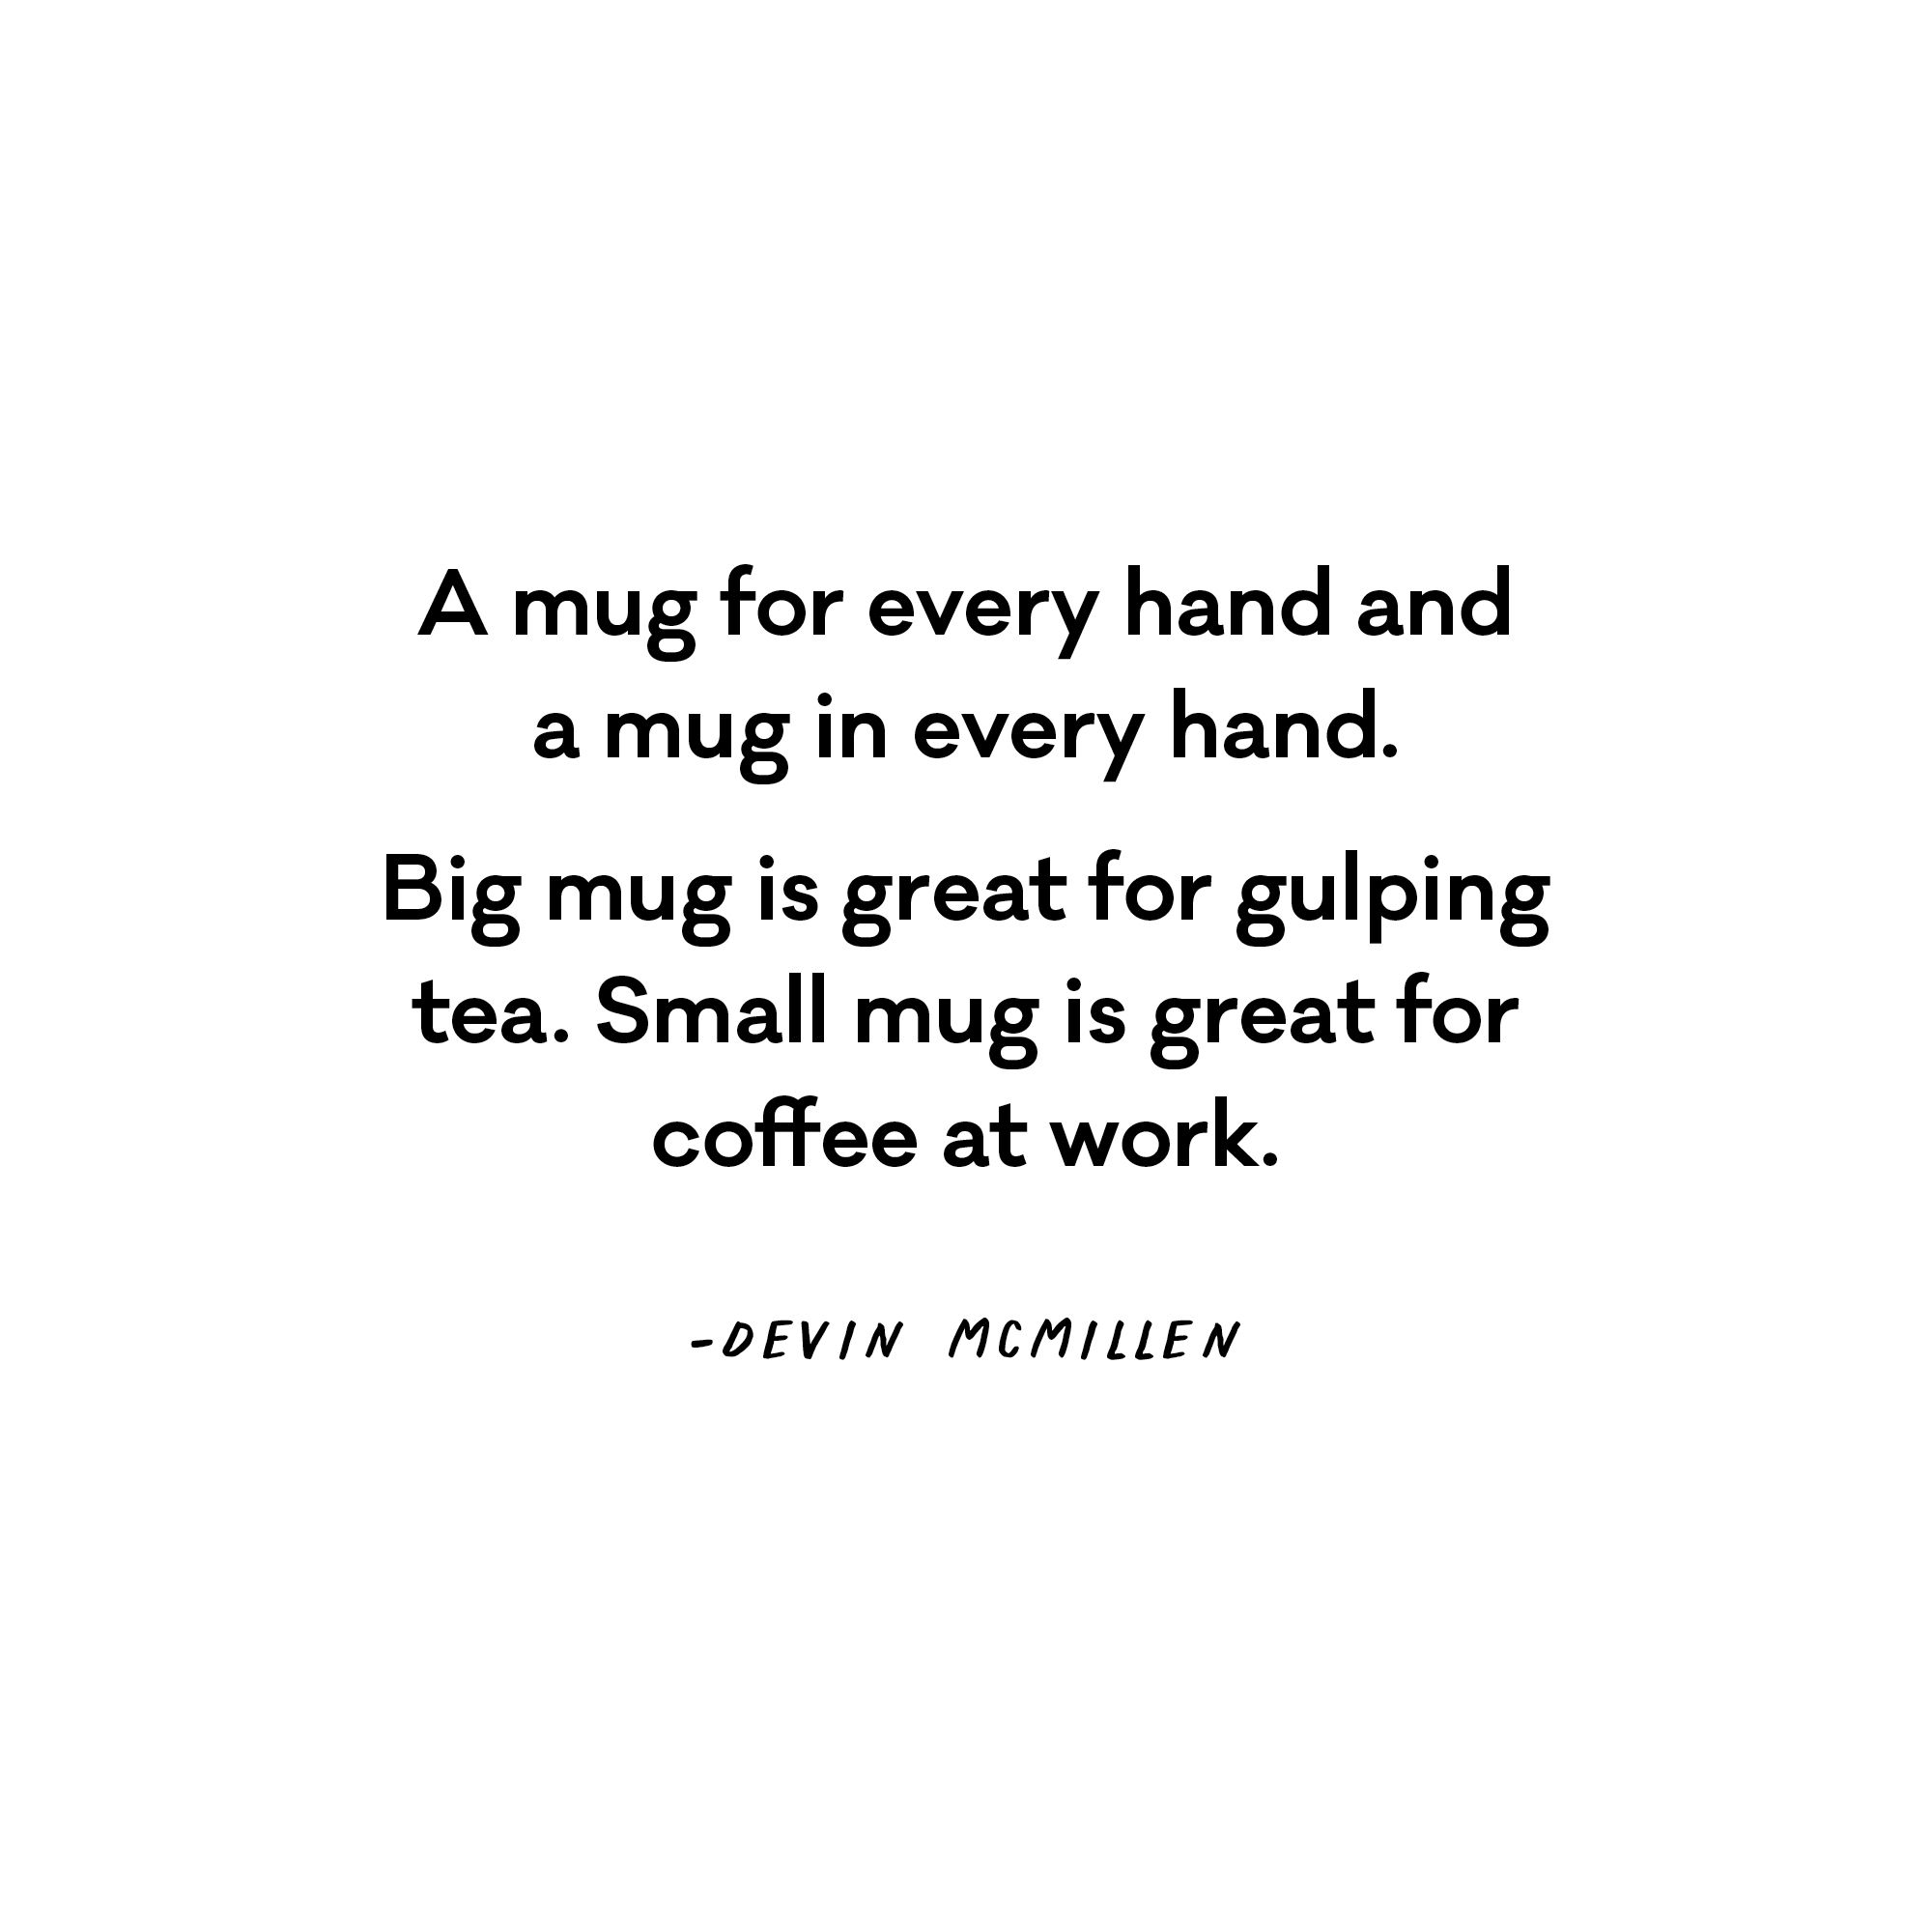 A mug for every hand and a mug in every hand. Big mug is great for gulping tea. - Devin McMillen  Small mug is great for coffee at work. 